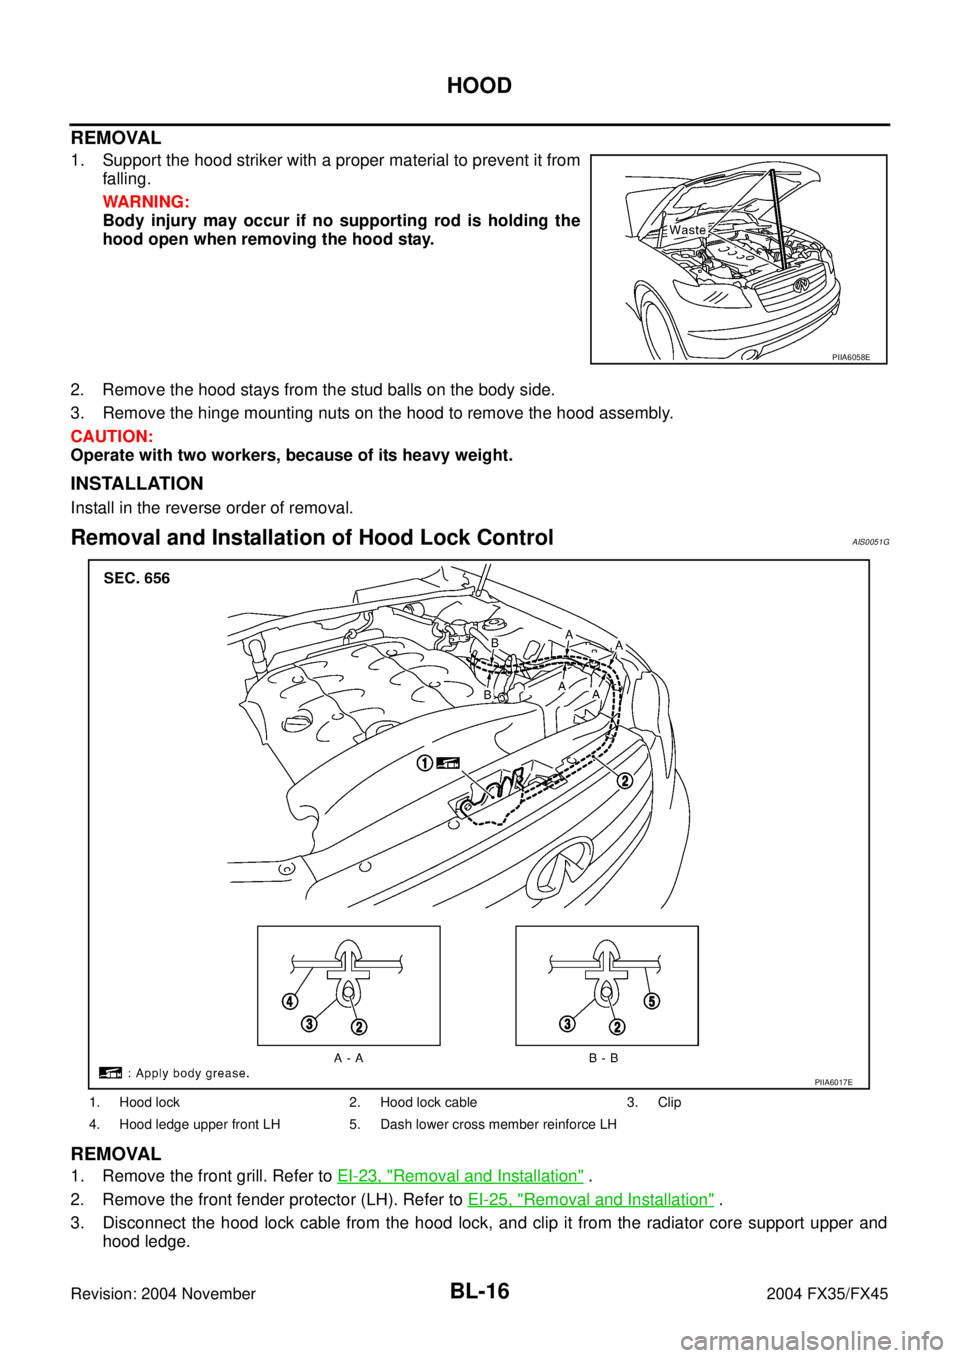 INFINITI FX35 2004  Service Manual BL-16
HOOD
Revision: 2004 November 2004 FX35/FX45
REMOVAL
1. Support the hood striker with a proper material to prevent it from
falling.
WARNING:
Body injury may occur if no supporting rod is holding 